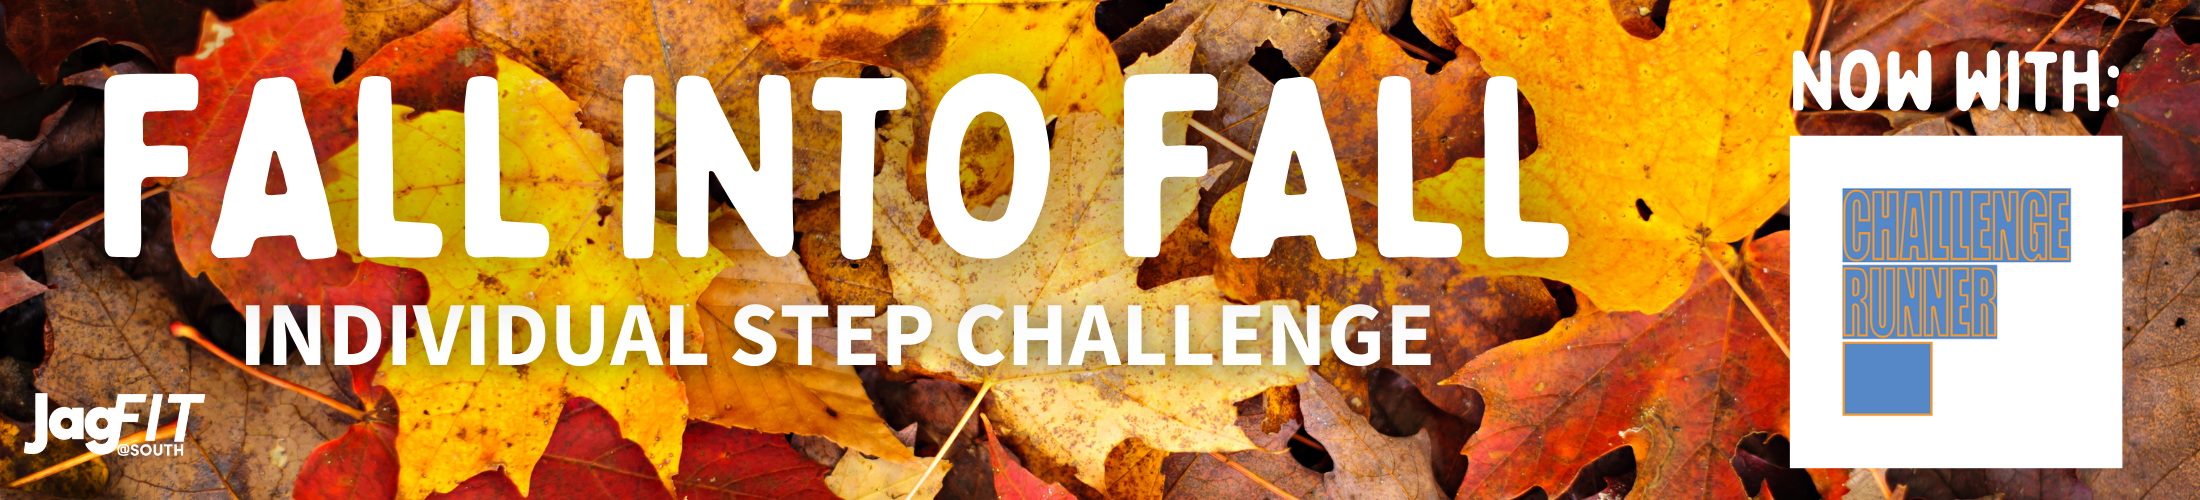 Fall into Fall Individual Step Challenge Now with Challenge Runner